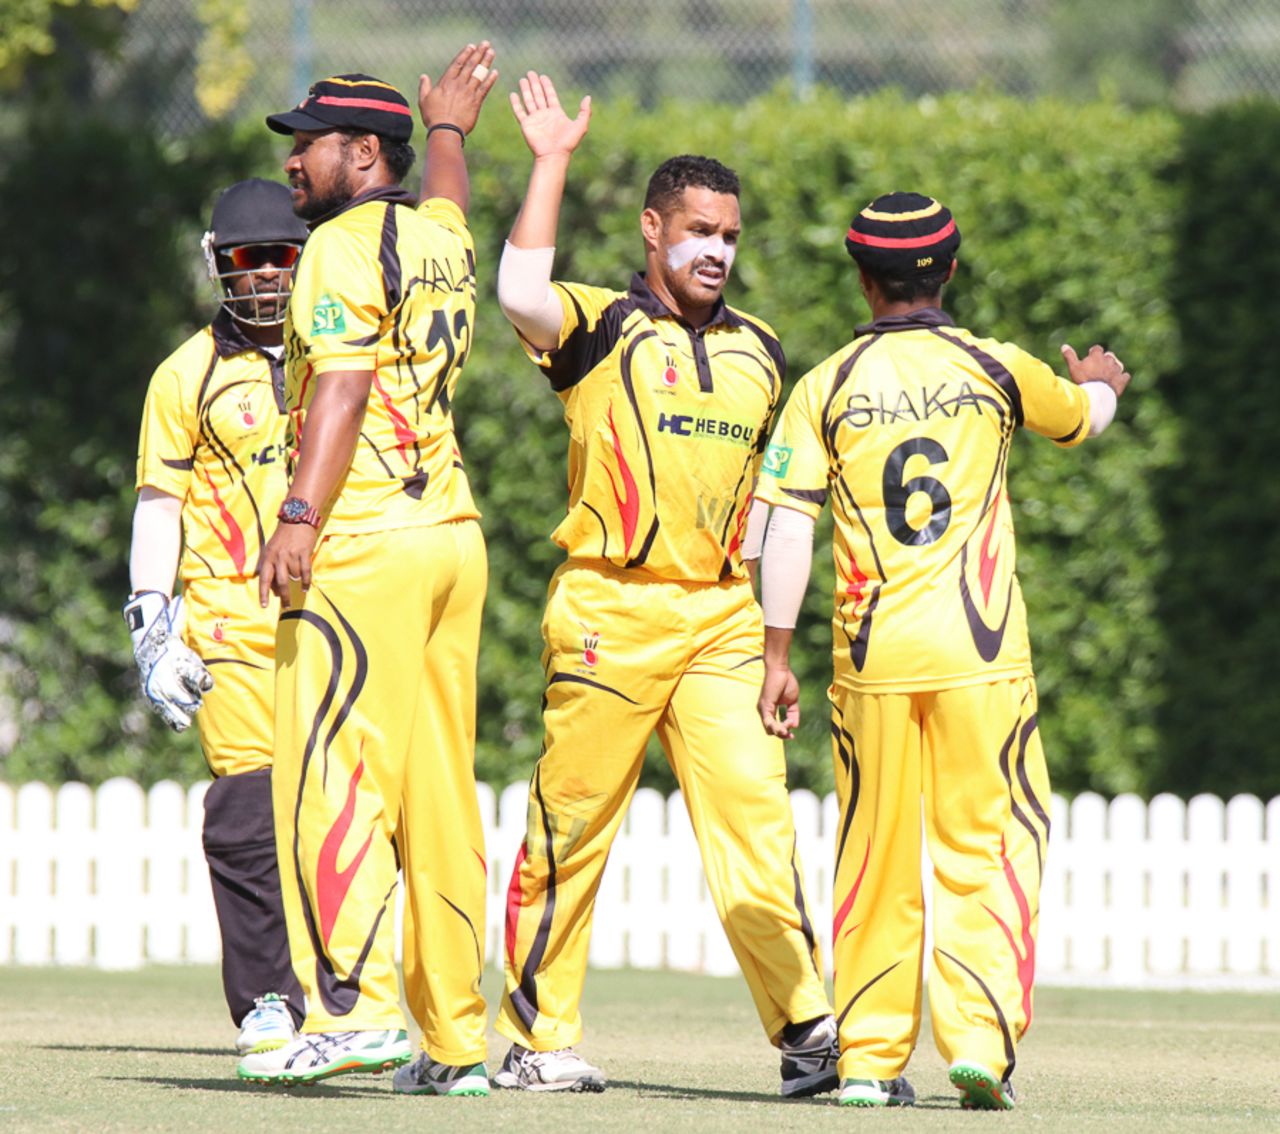 Chad Soper gets a high five from captain Assad Vala and Lega Siaka after taking a wicket, Hong Kong v Papua New Guinea, 1st ODI, 2015-17 WCL Championship, Dubai, December 6, 2017